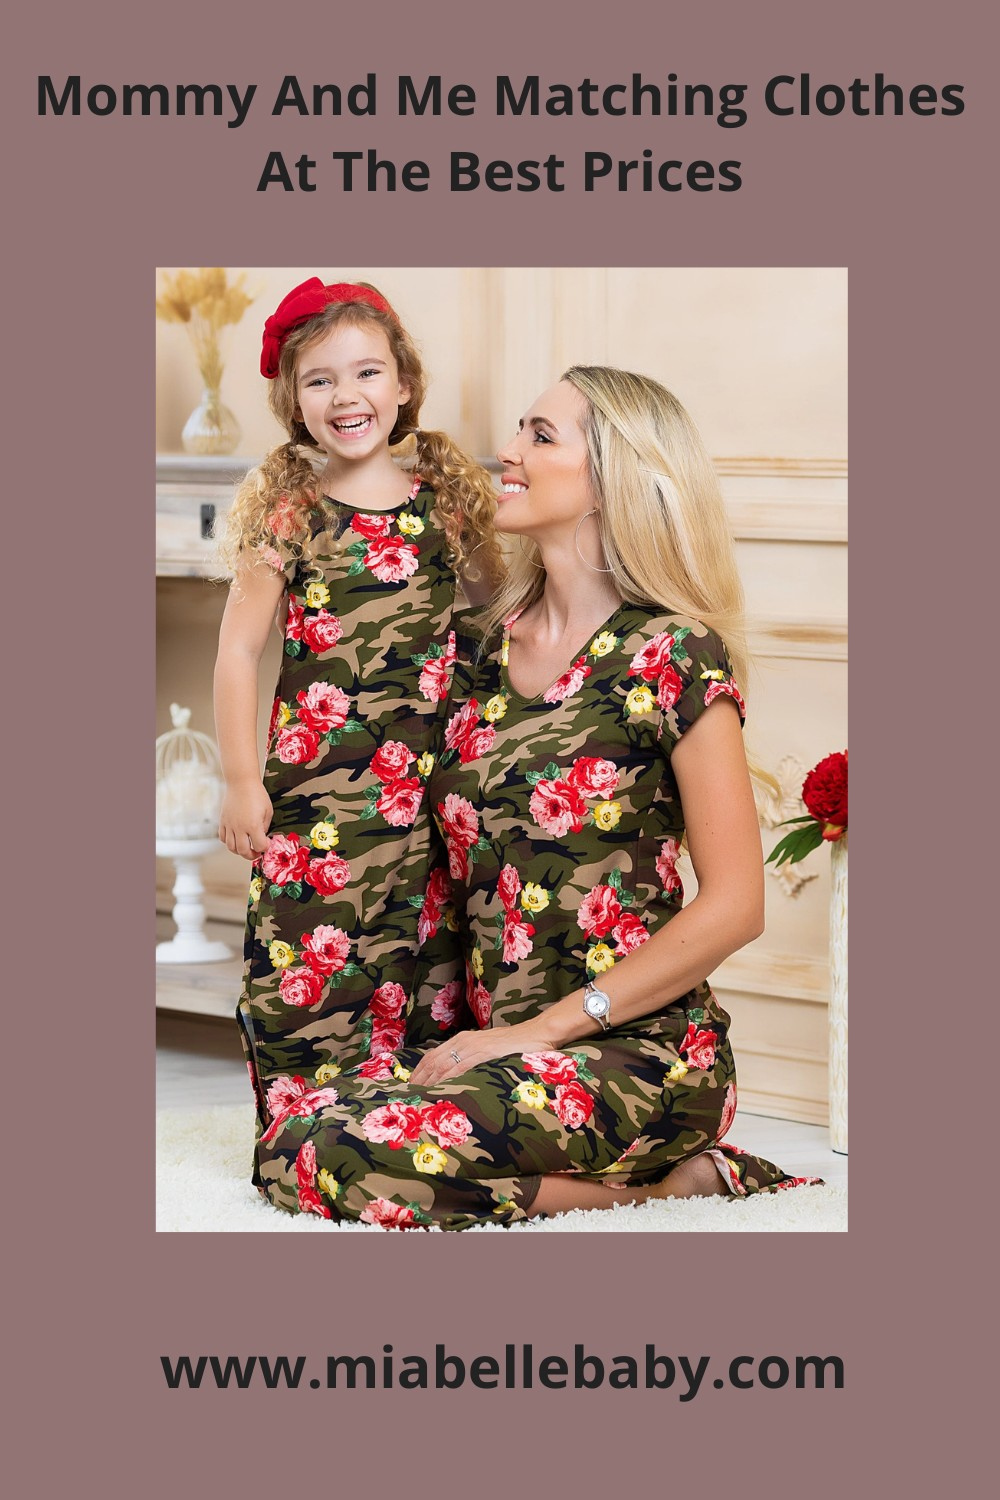 Mommy And Me Matching Clothes At The Best Prices